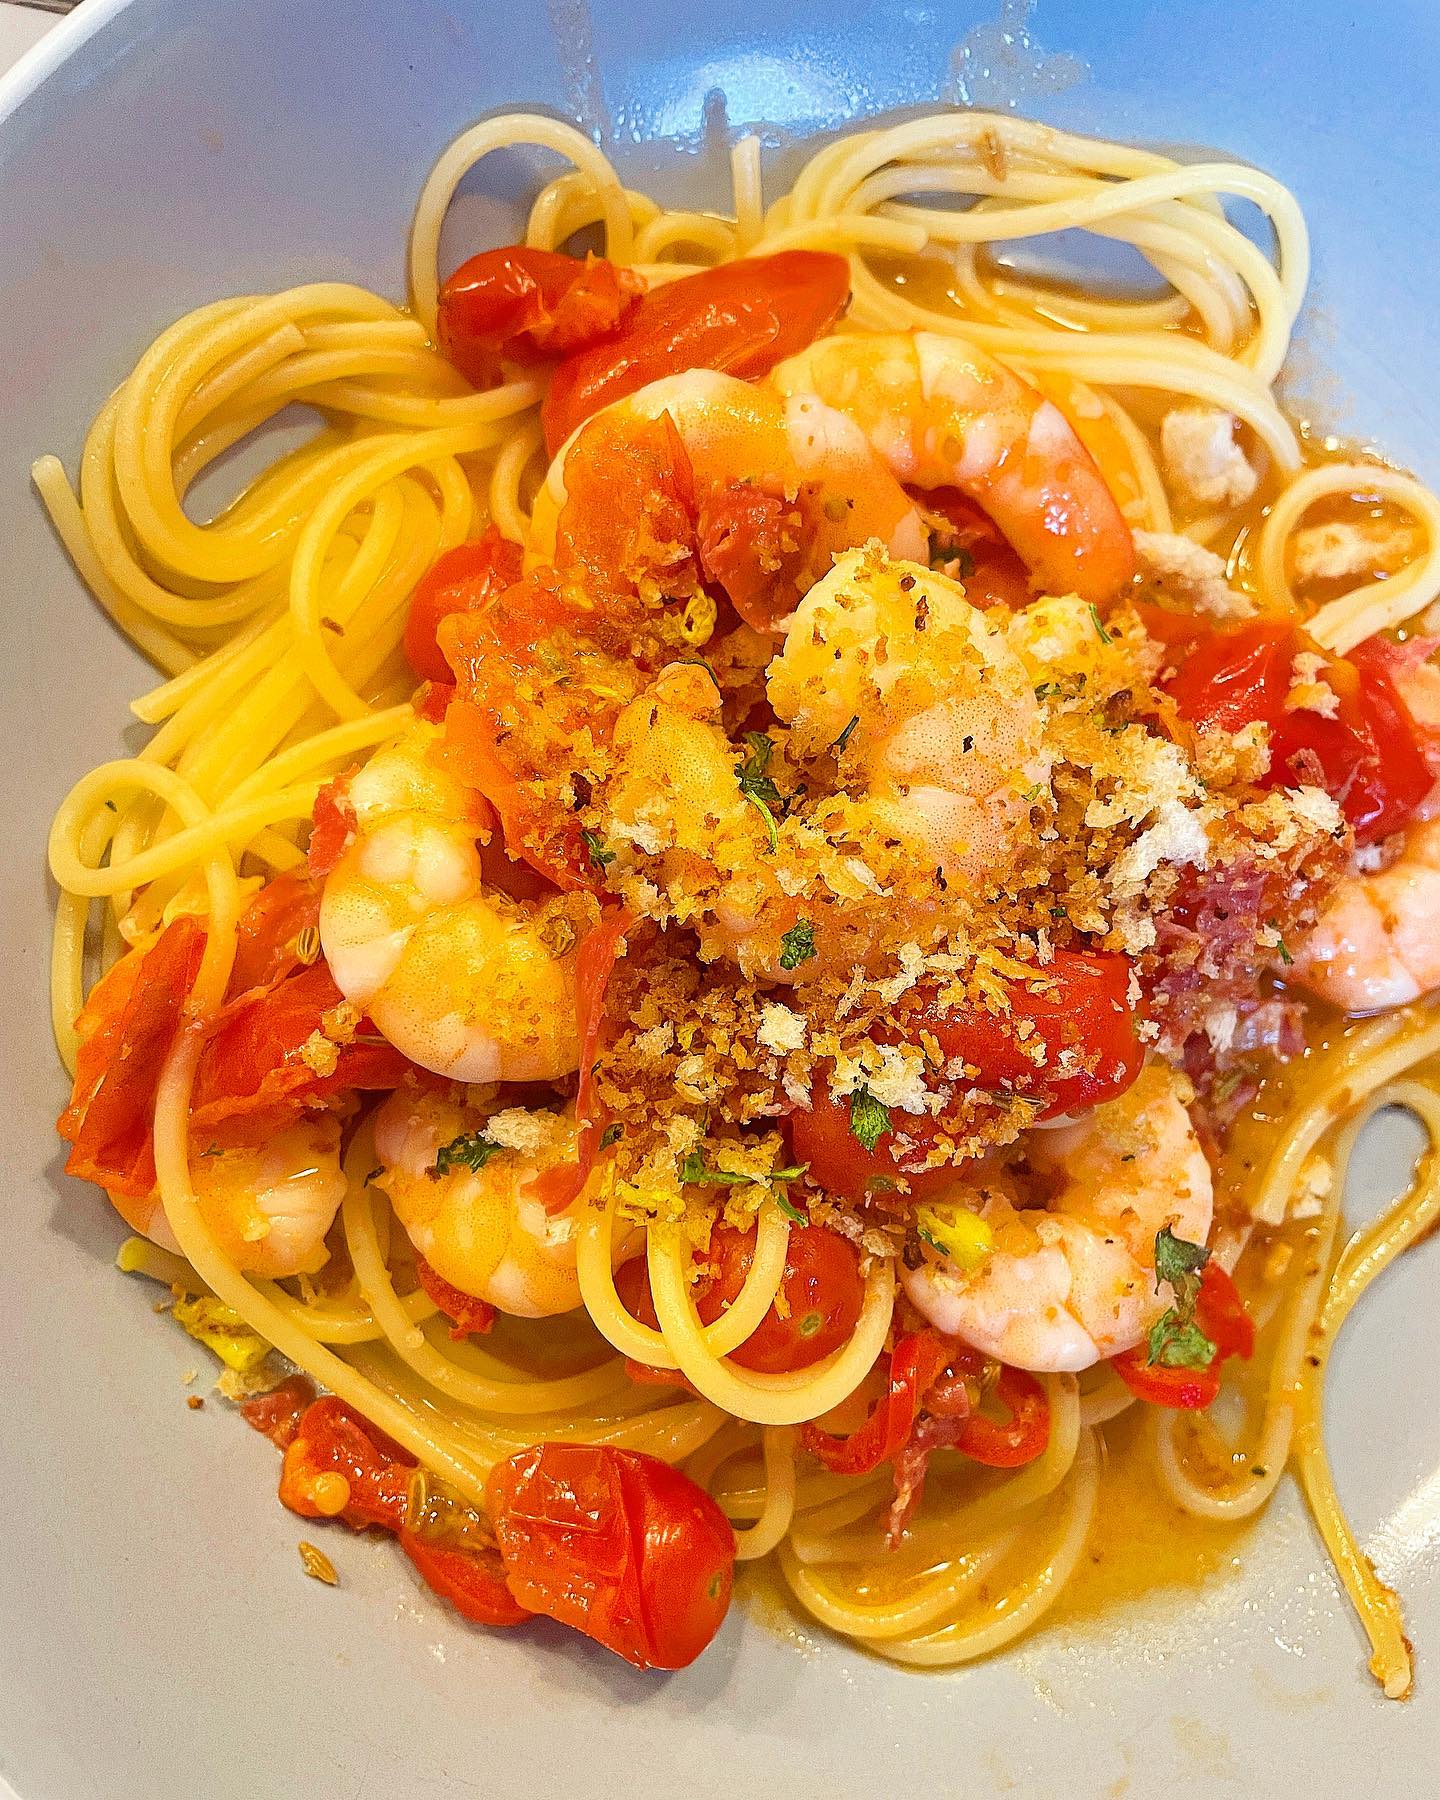 @bbcgoodfood Spaghetti with chilli prawns, salami & gremolata breadcrumbs. One of my fav recipes of theirs 😋 

#bbcgoodfood #prawnspaghetti #pasta #pastarecipe #goodfood #documentingmydinner